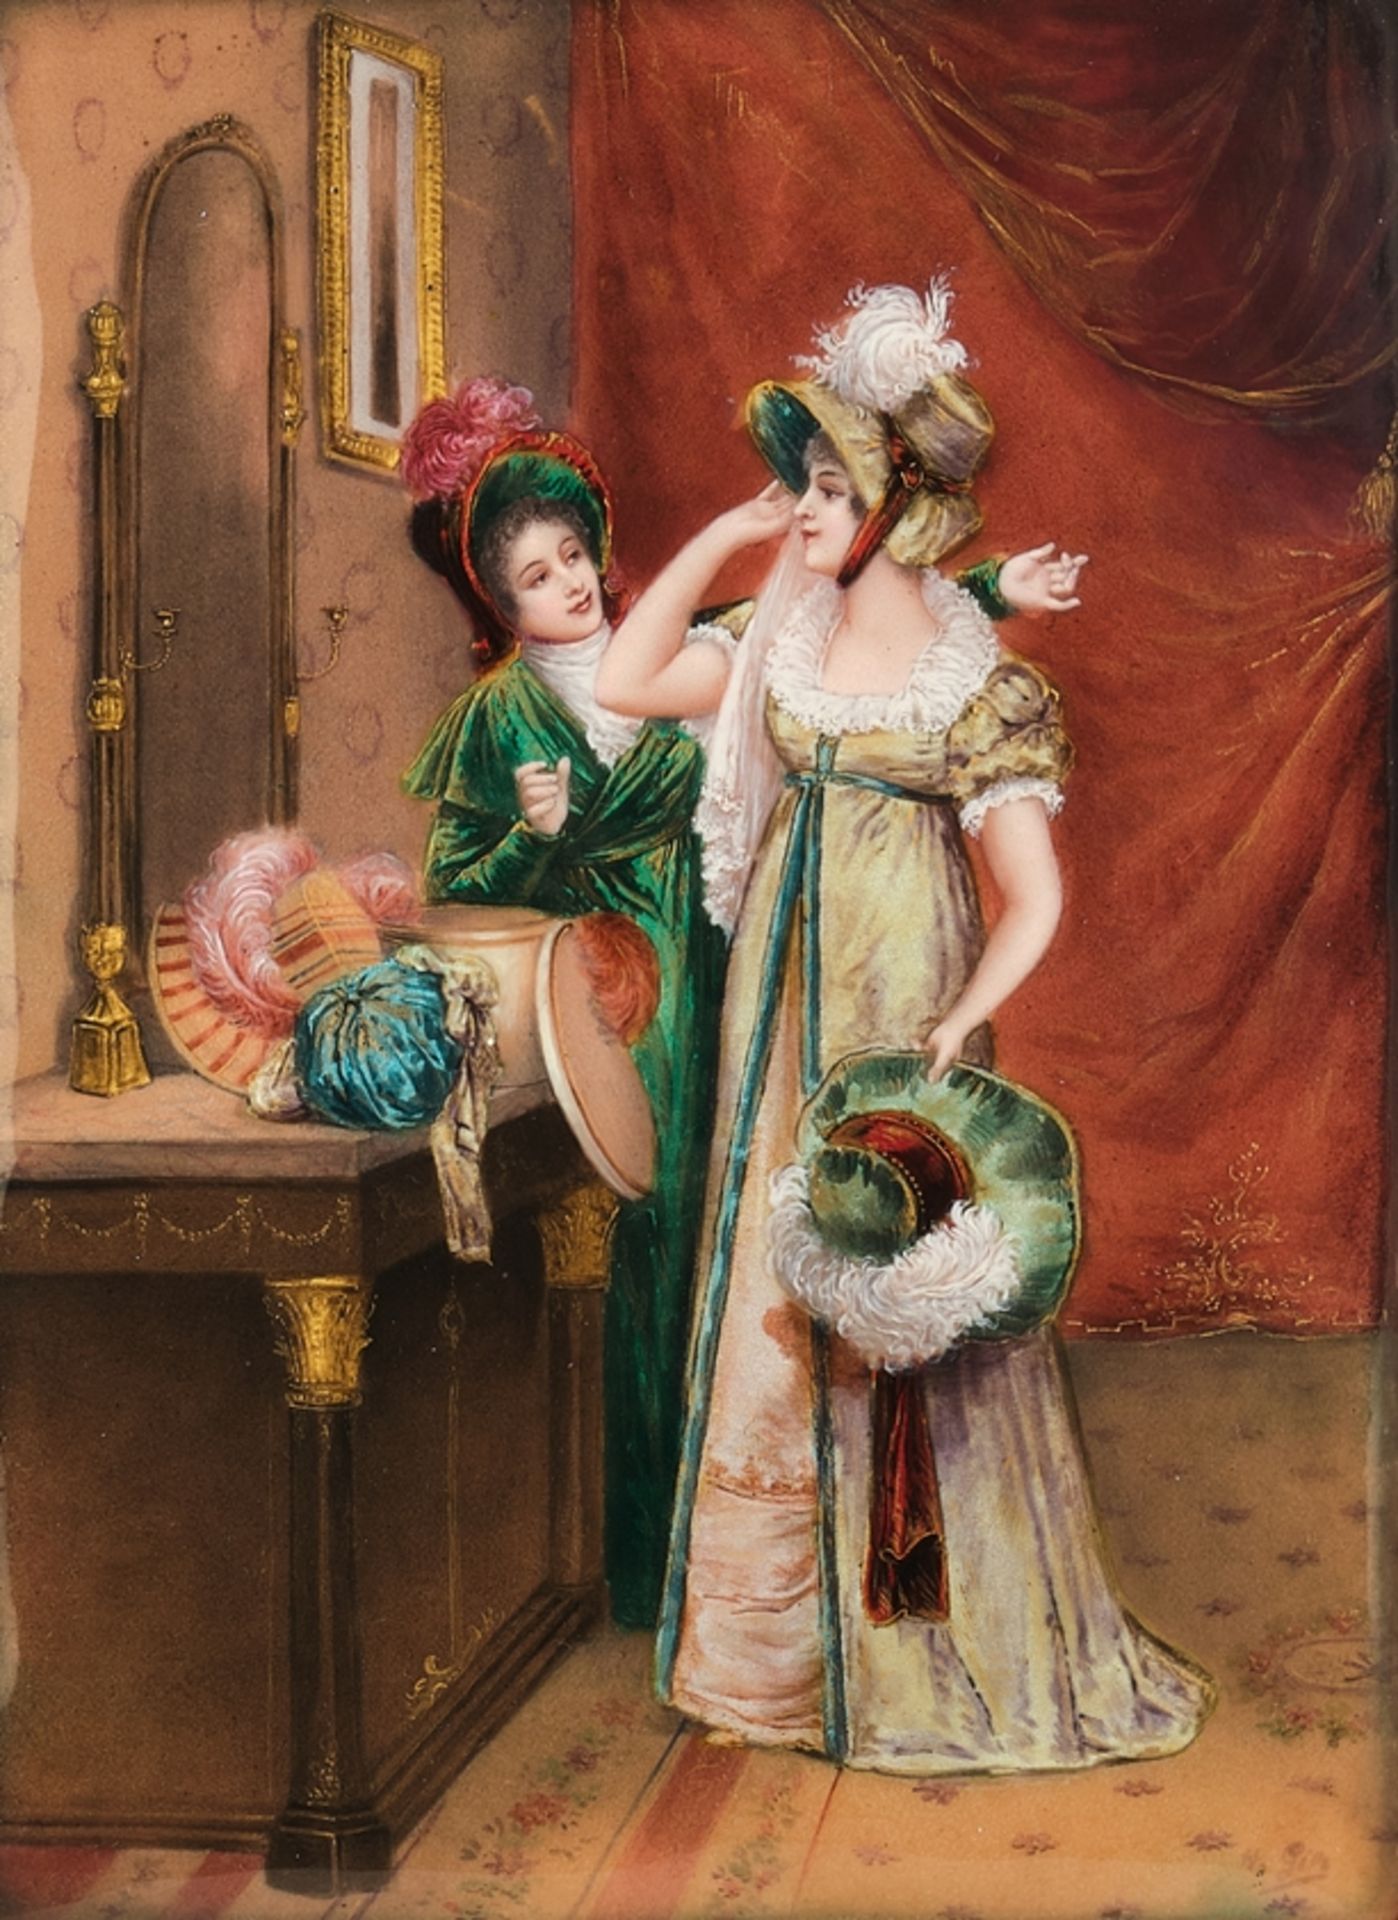 Enamel painting, , "At the milliner's", probably Limoges, around 1900, enamel on copper, polychrome